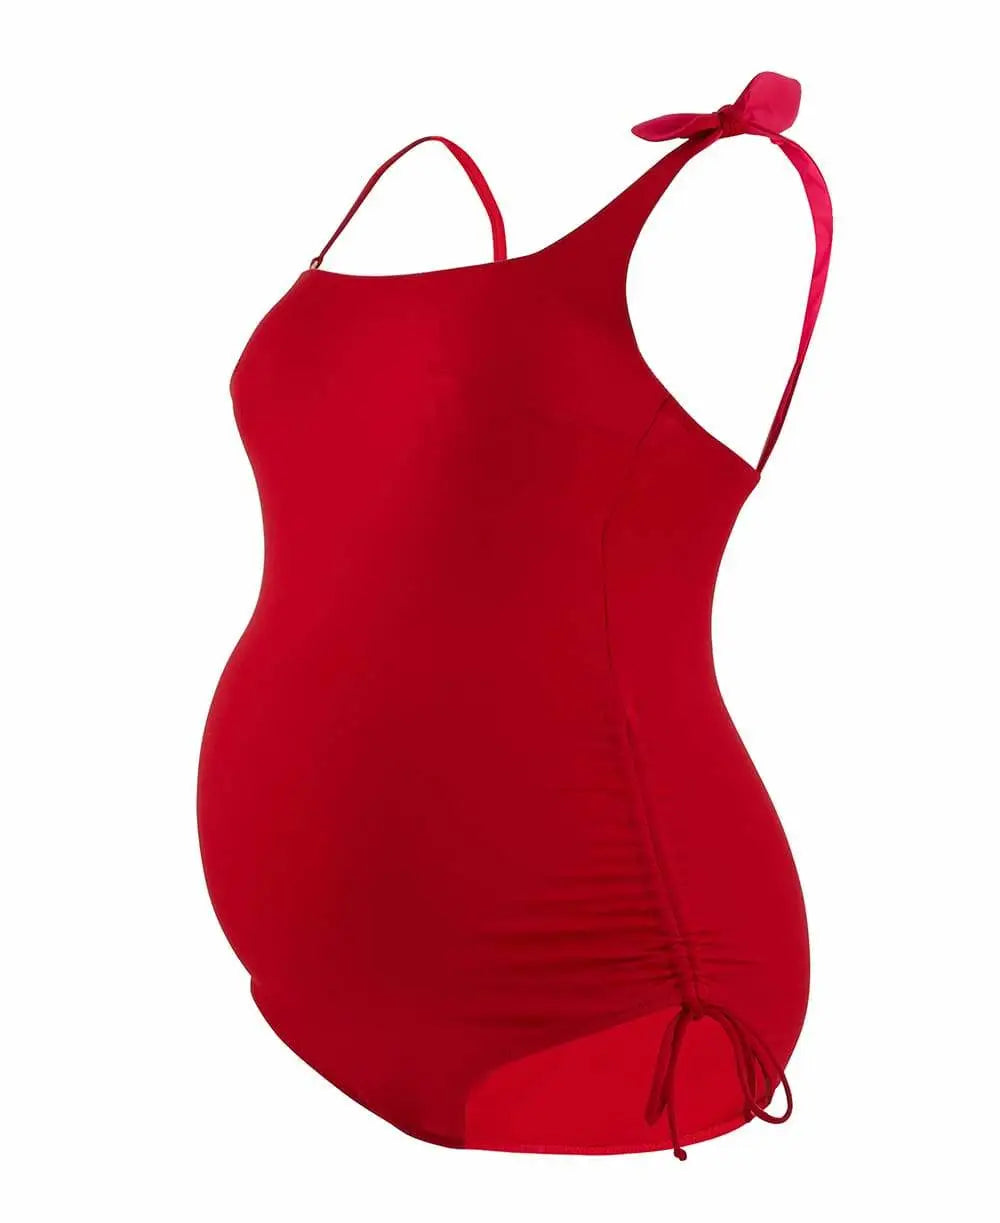 Maternity swimsuit Dolce red